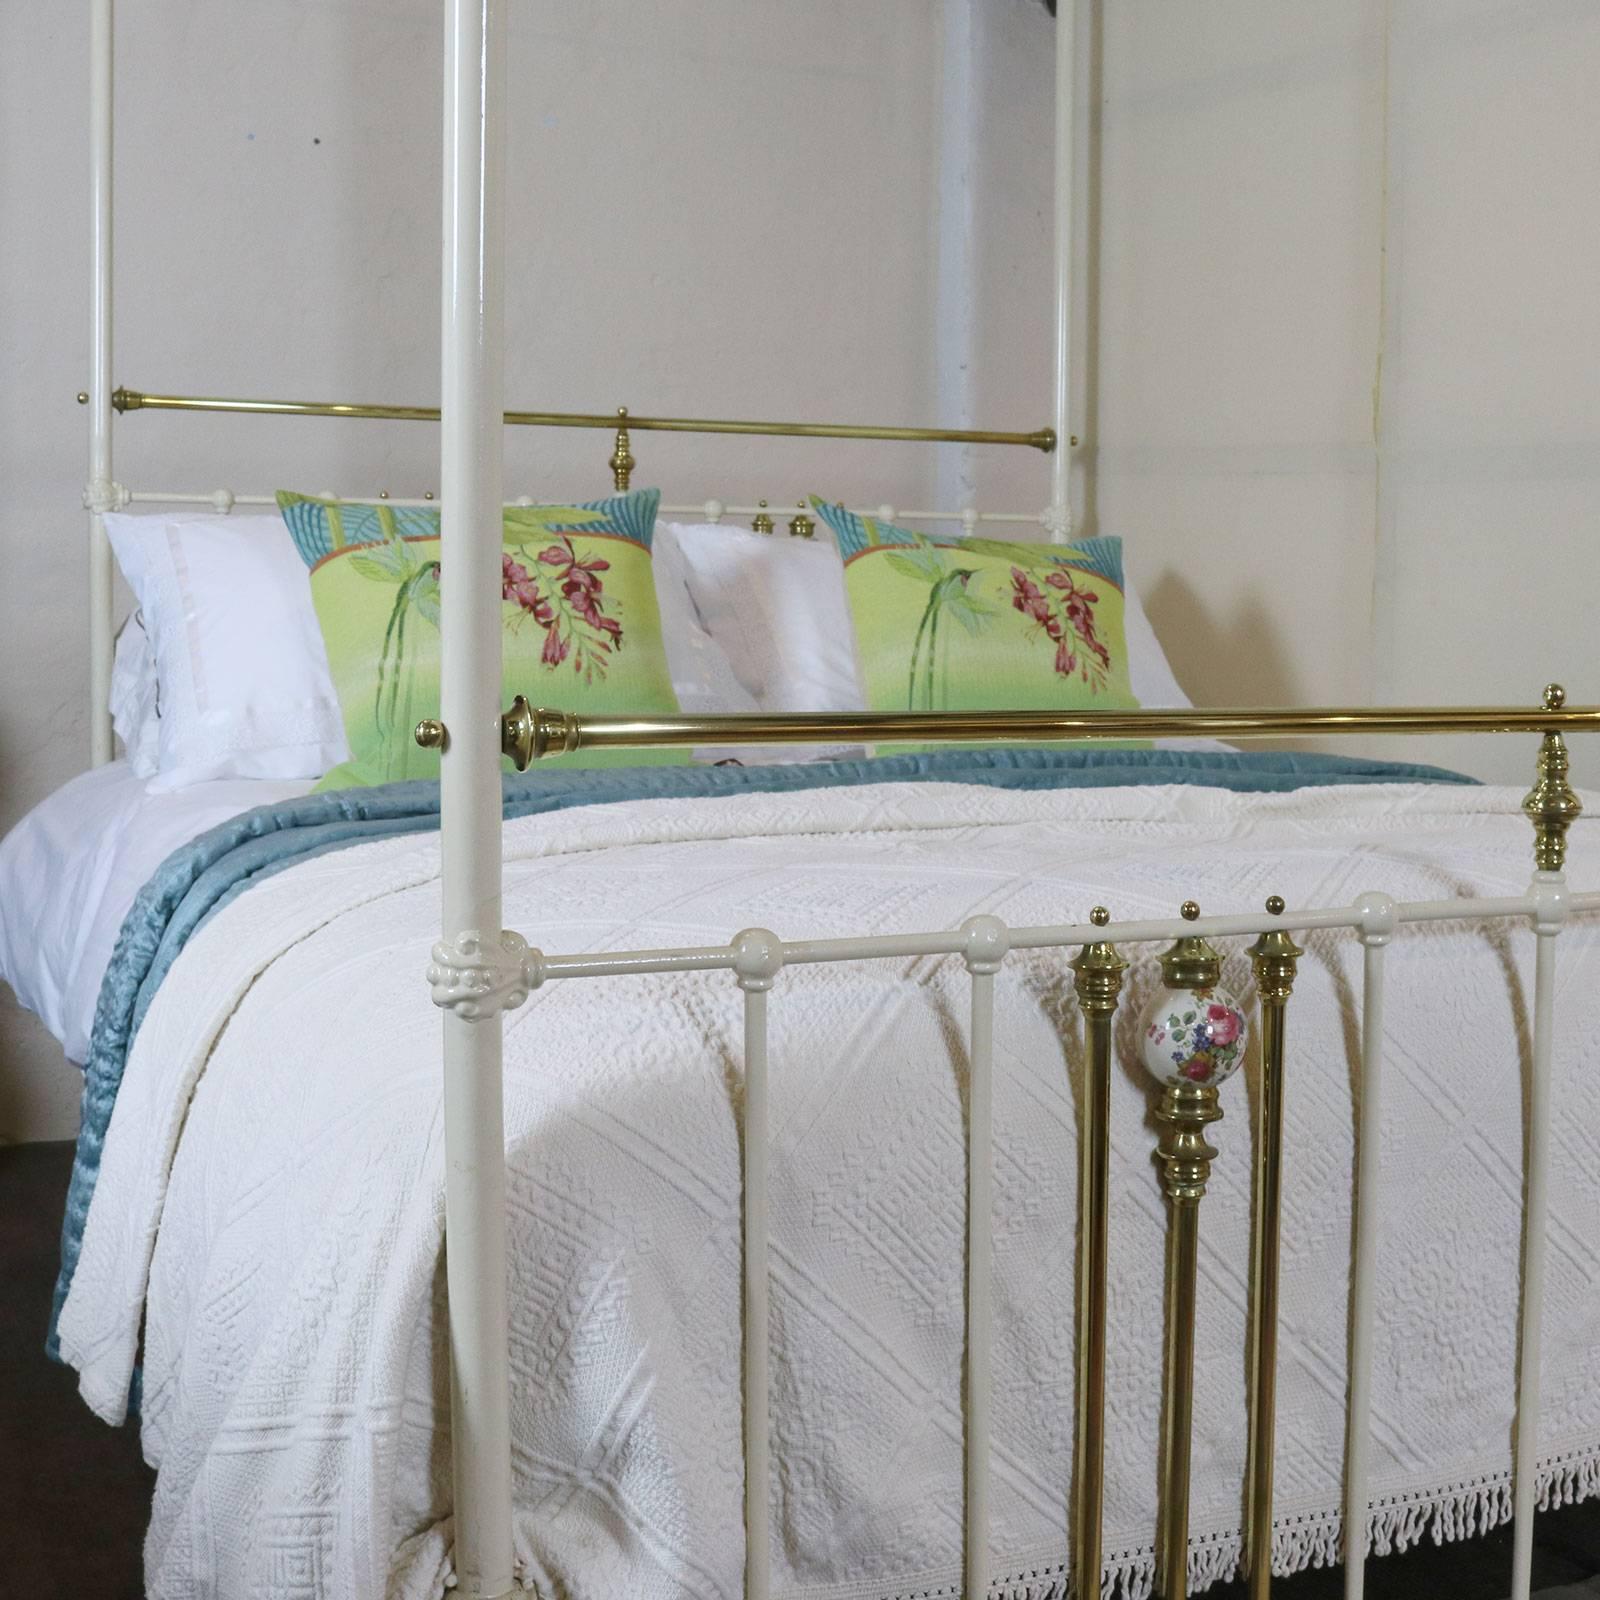 A brass and iron four poster bed adapted from an original Victorian frame, finished in cream, with china porcelain decoration.

This bed accepts a British king-size or American queen-size (60 inches wide) base and mattress set.

The price is for the